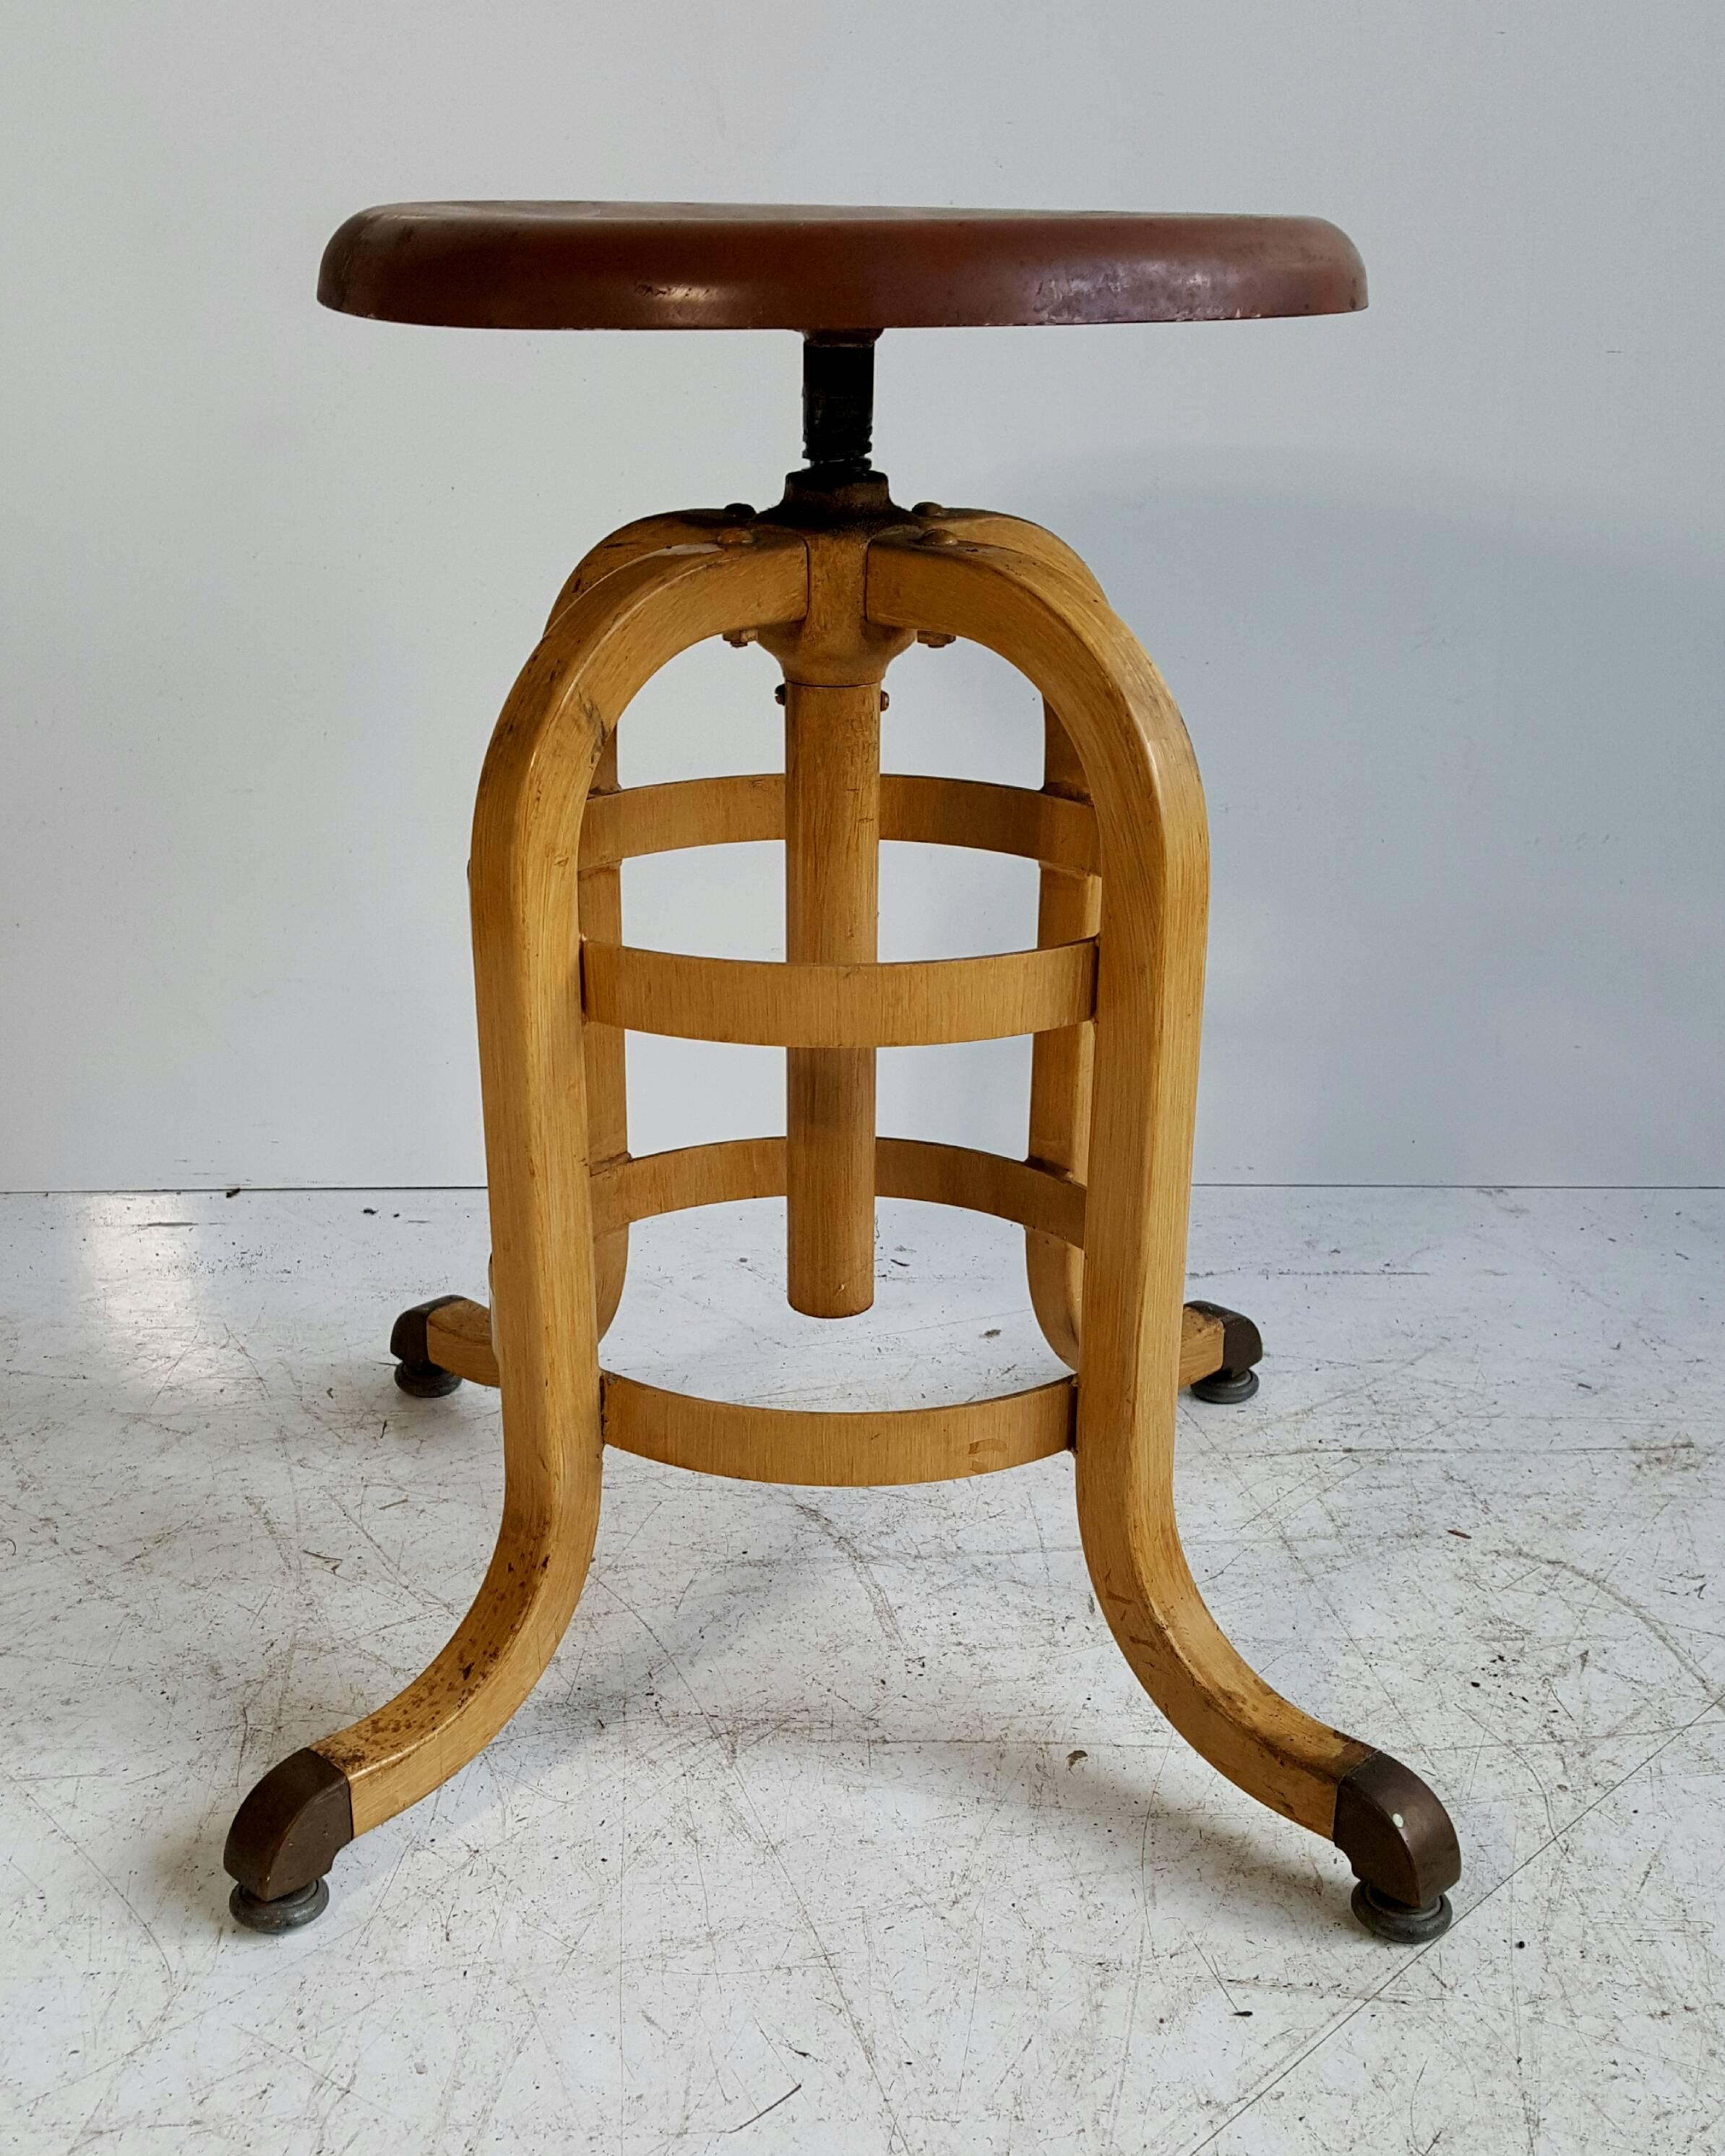 1930s, American Industrial stool, A.S. Aloe Company, pure form and function, wonderful original grain painted frame, swivel, adjustable height from 19